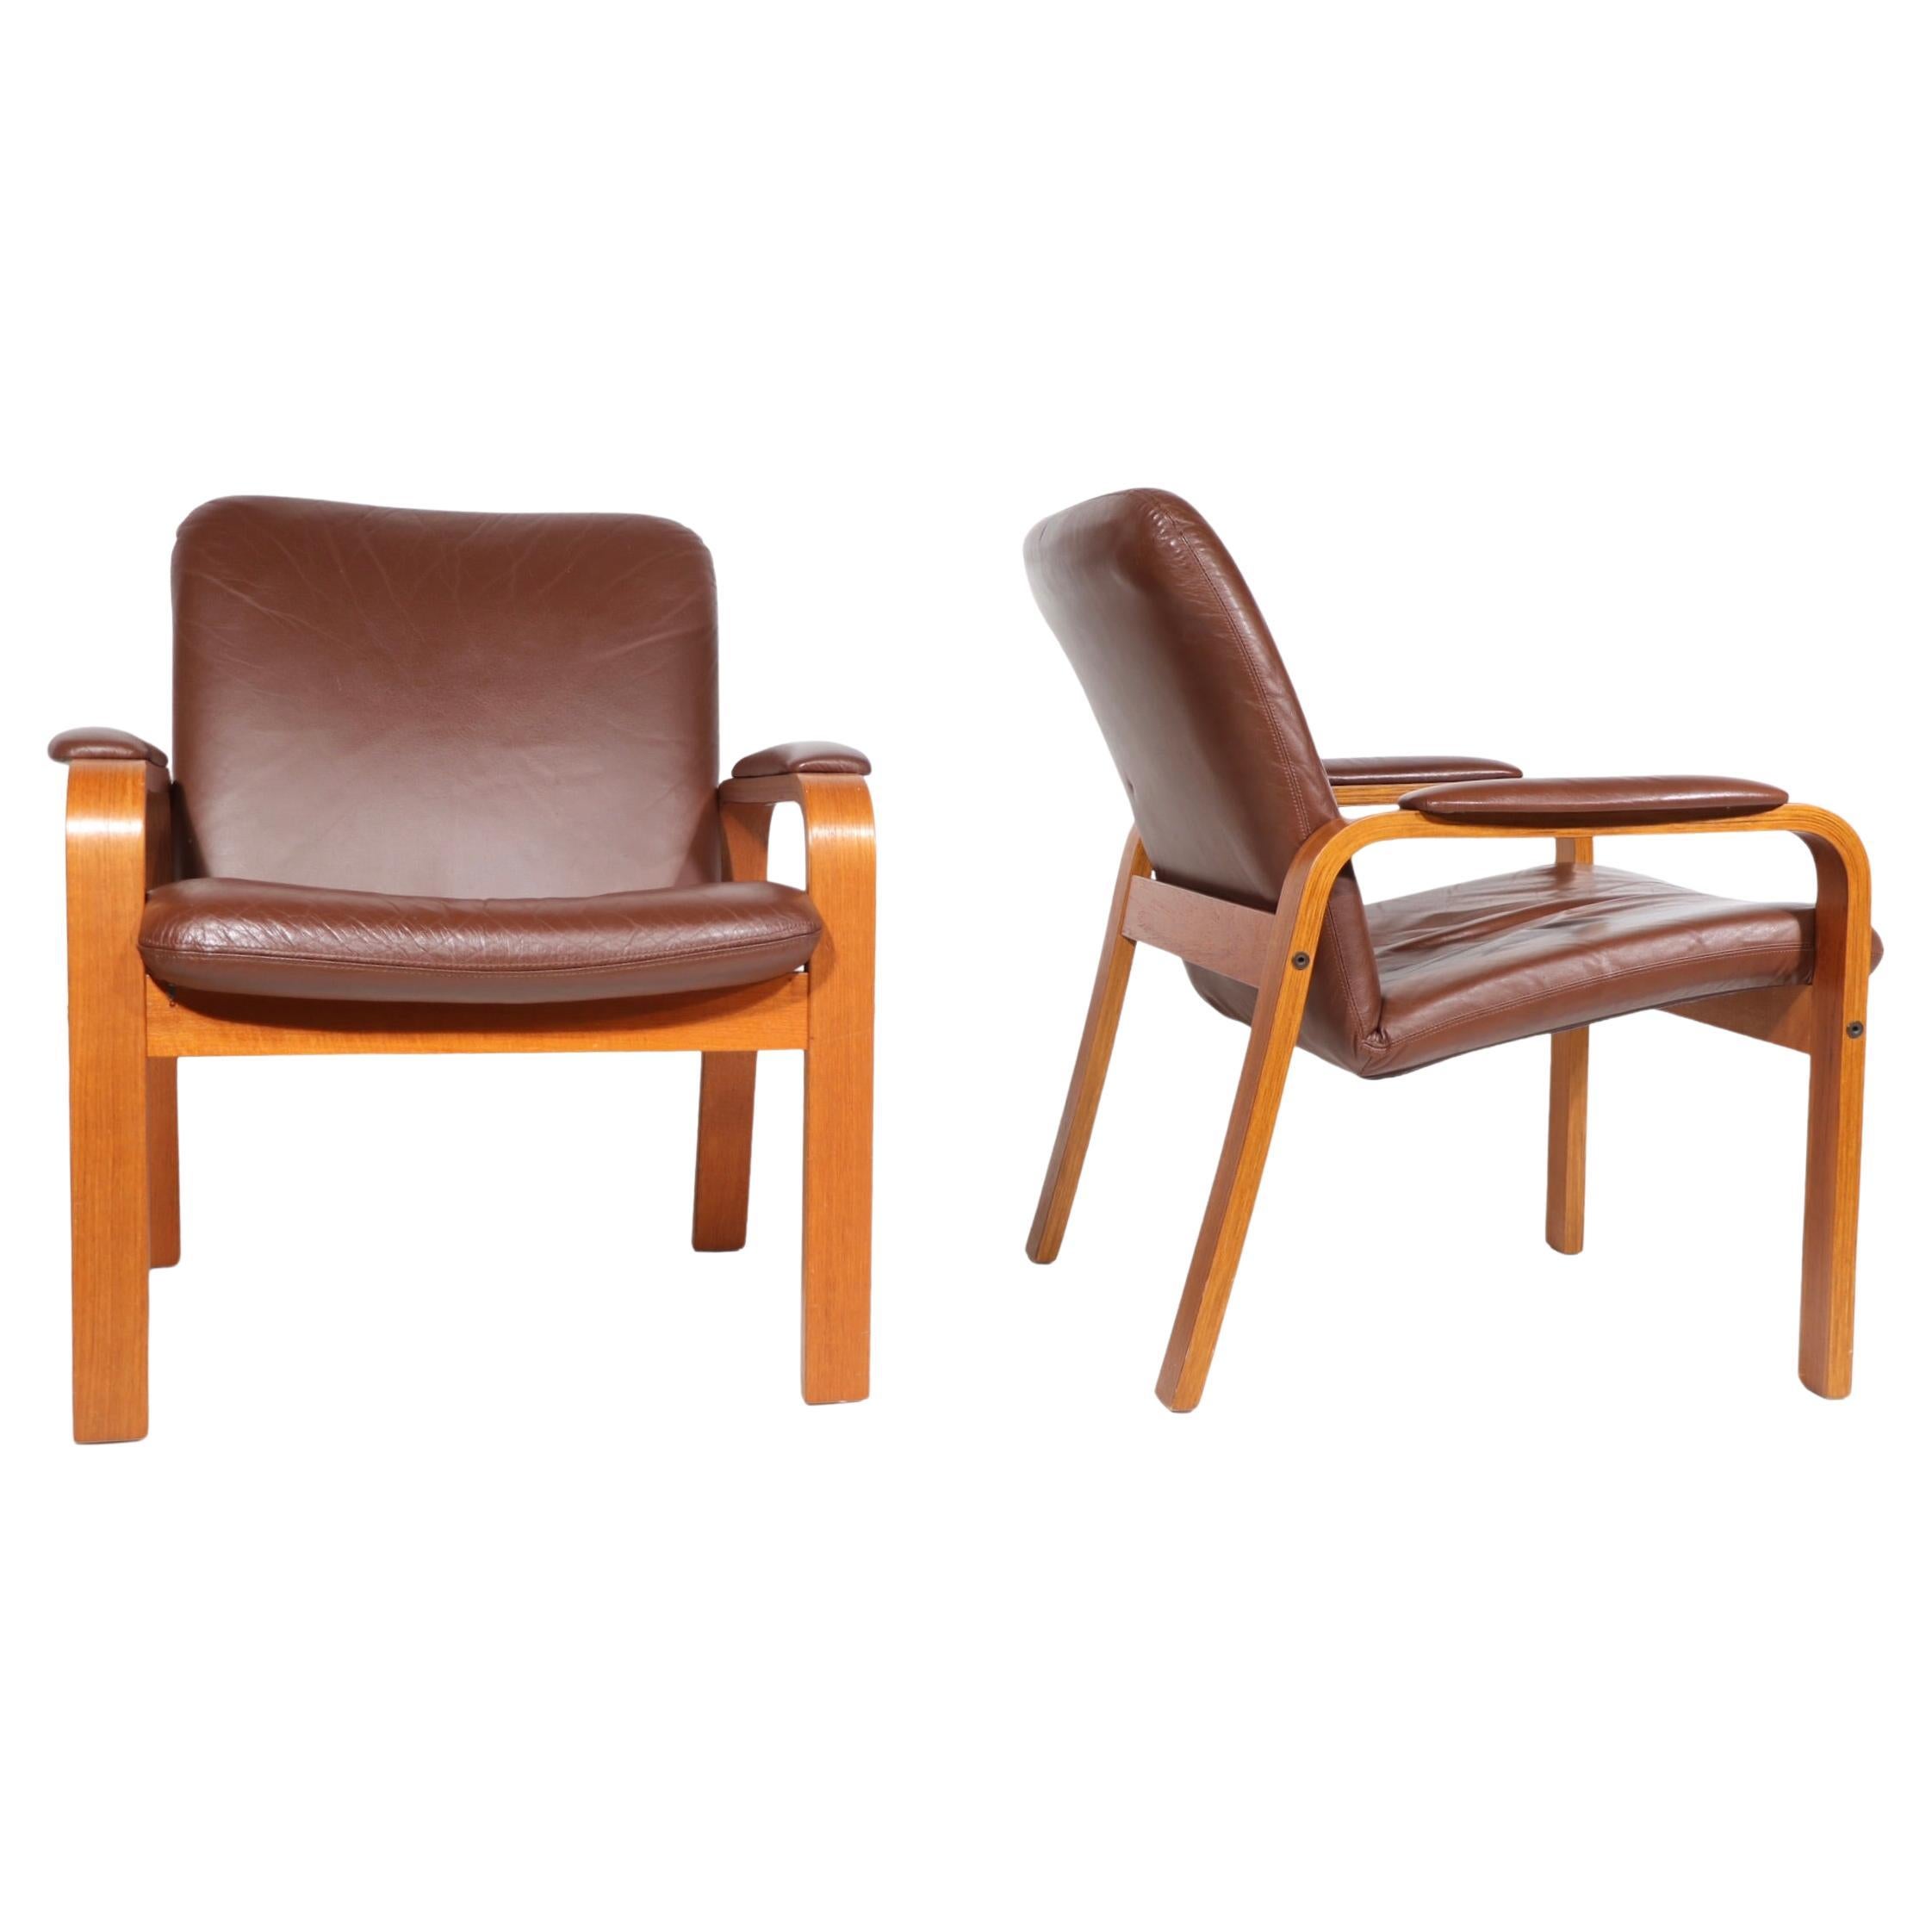 Pr. Scandinavian Mid Century Modern Lounge Arm Chairs Made in Norway by Ekorness For Sale